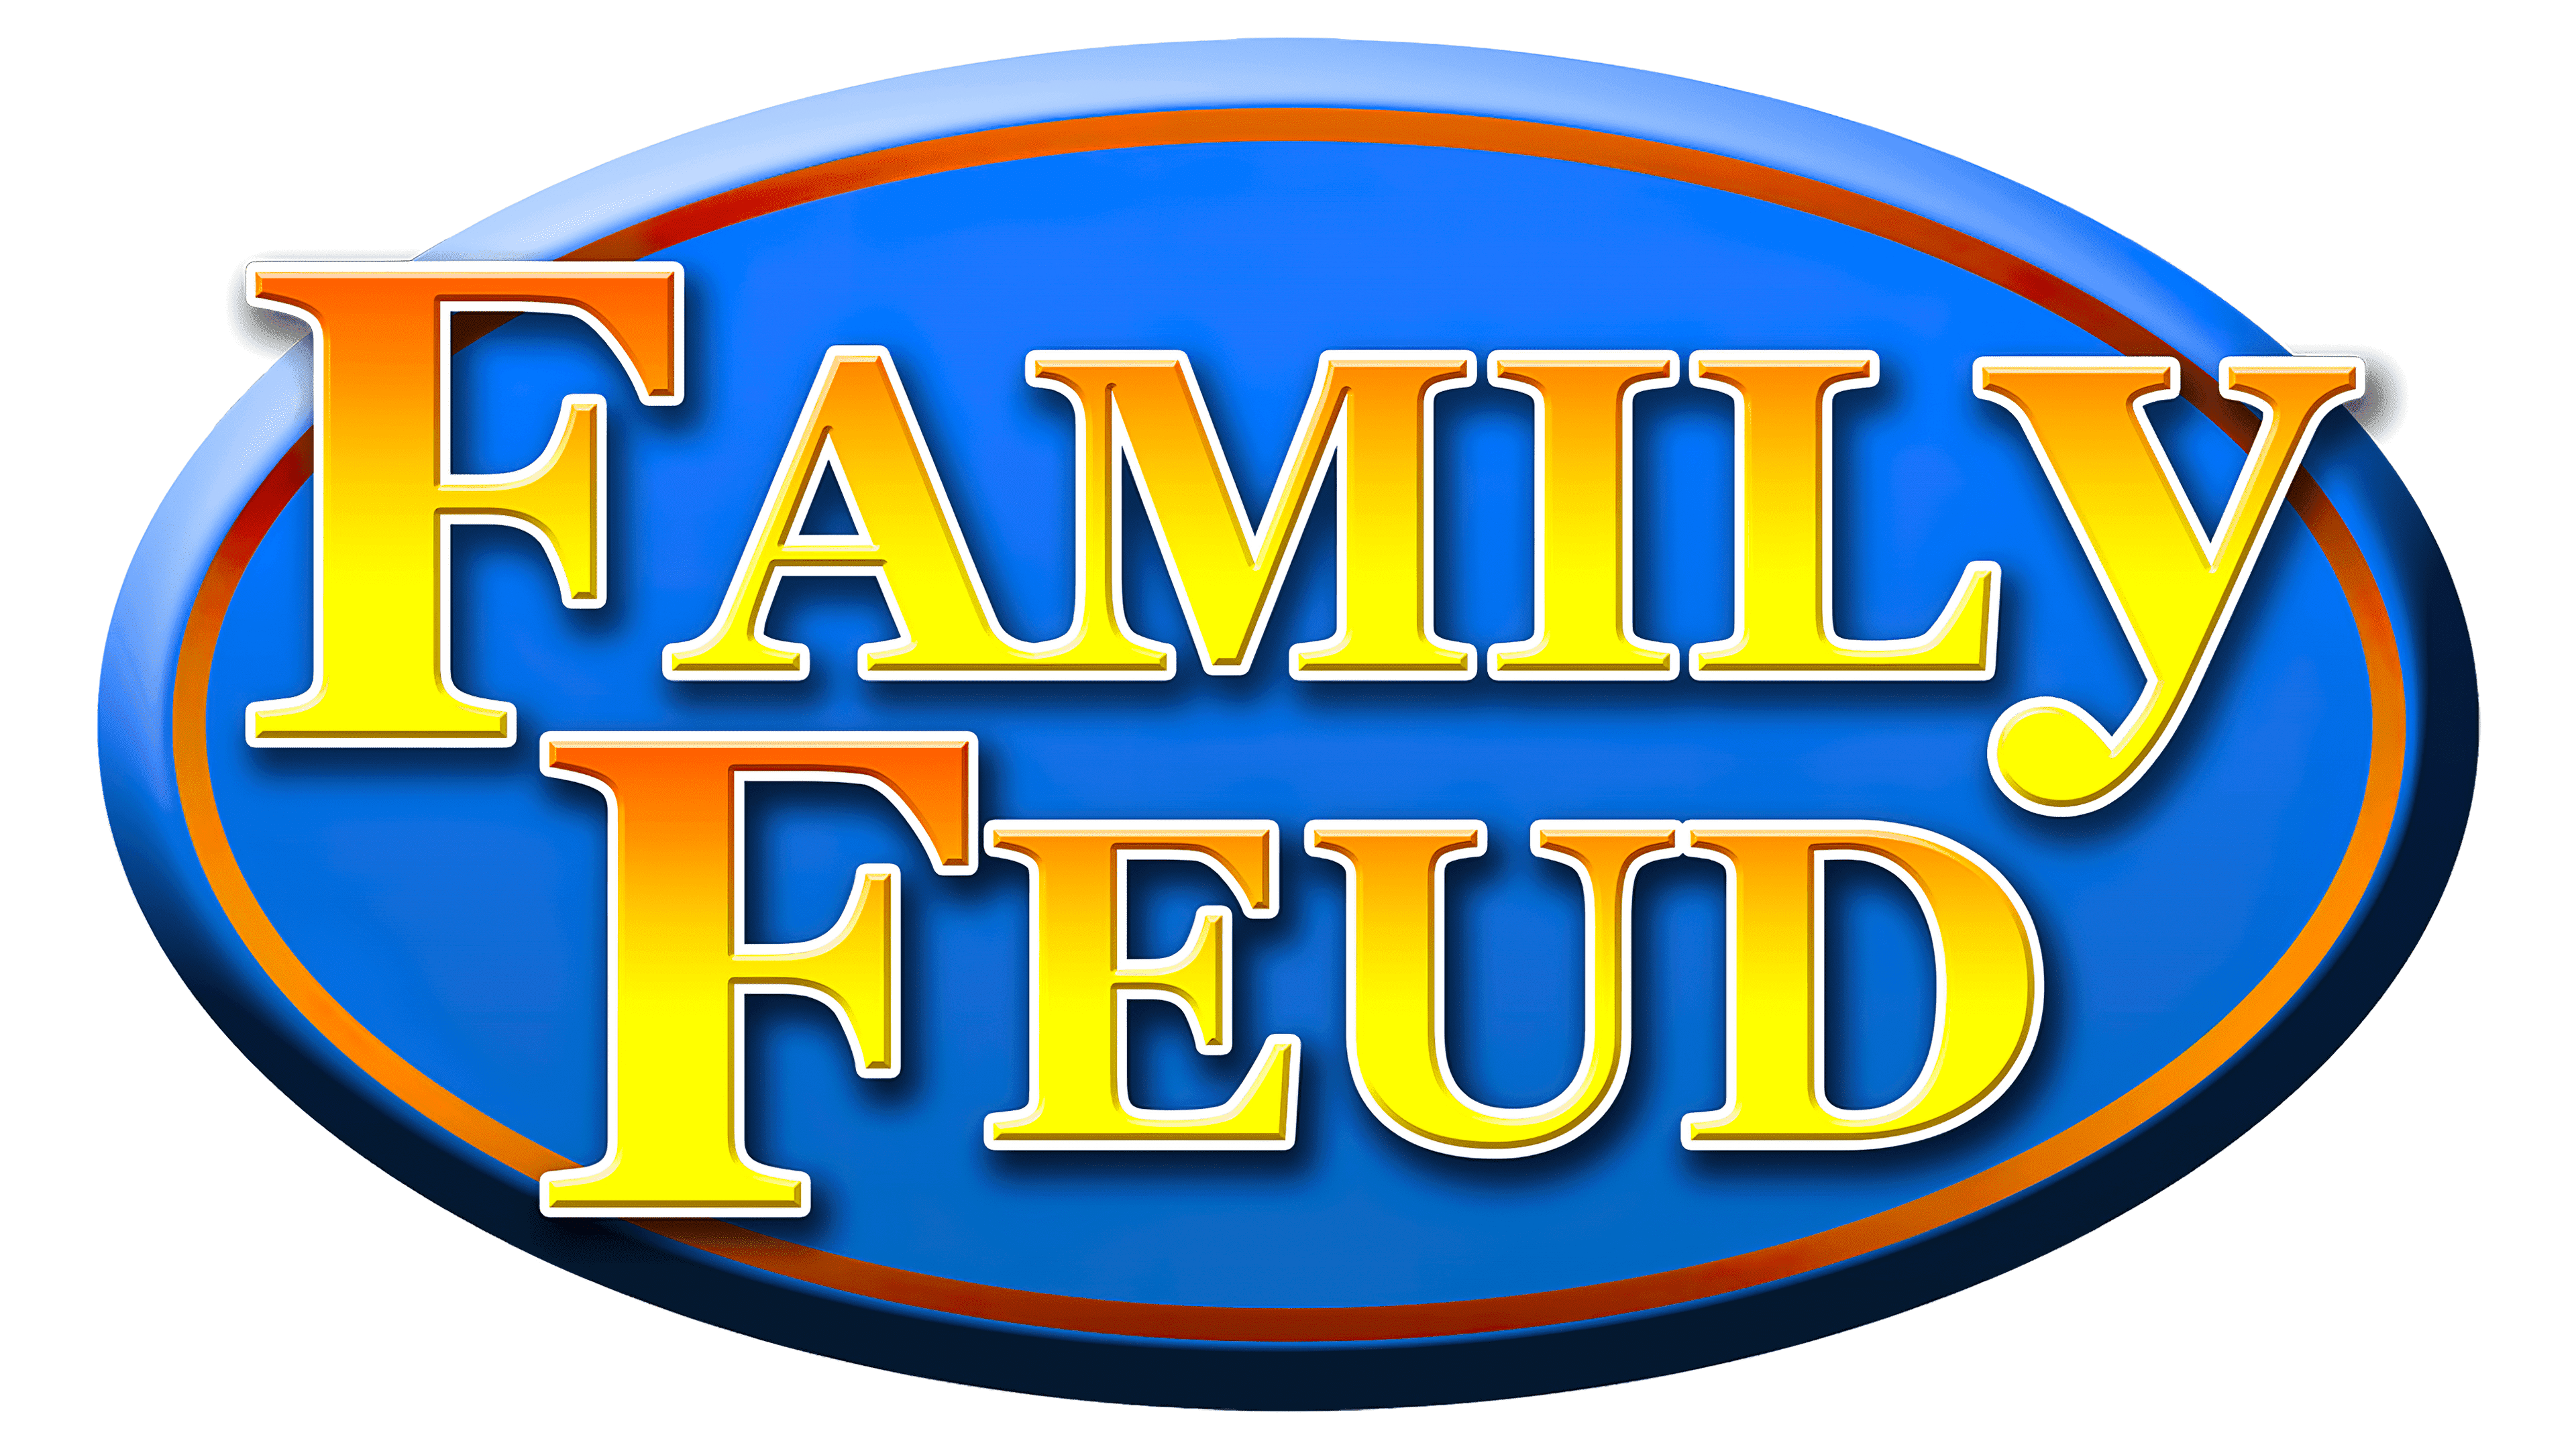 Family Feud Logo, symbol, meaning, history, PNG, brand